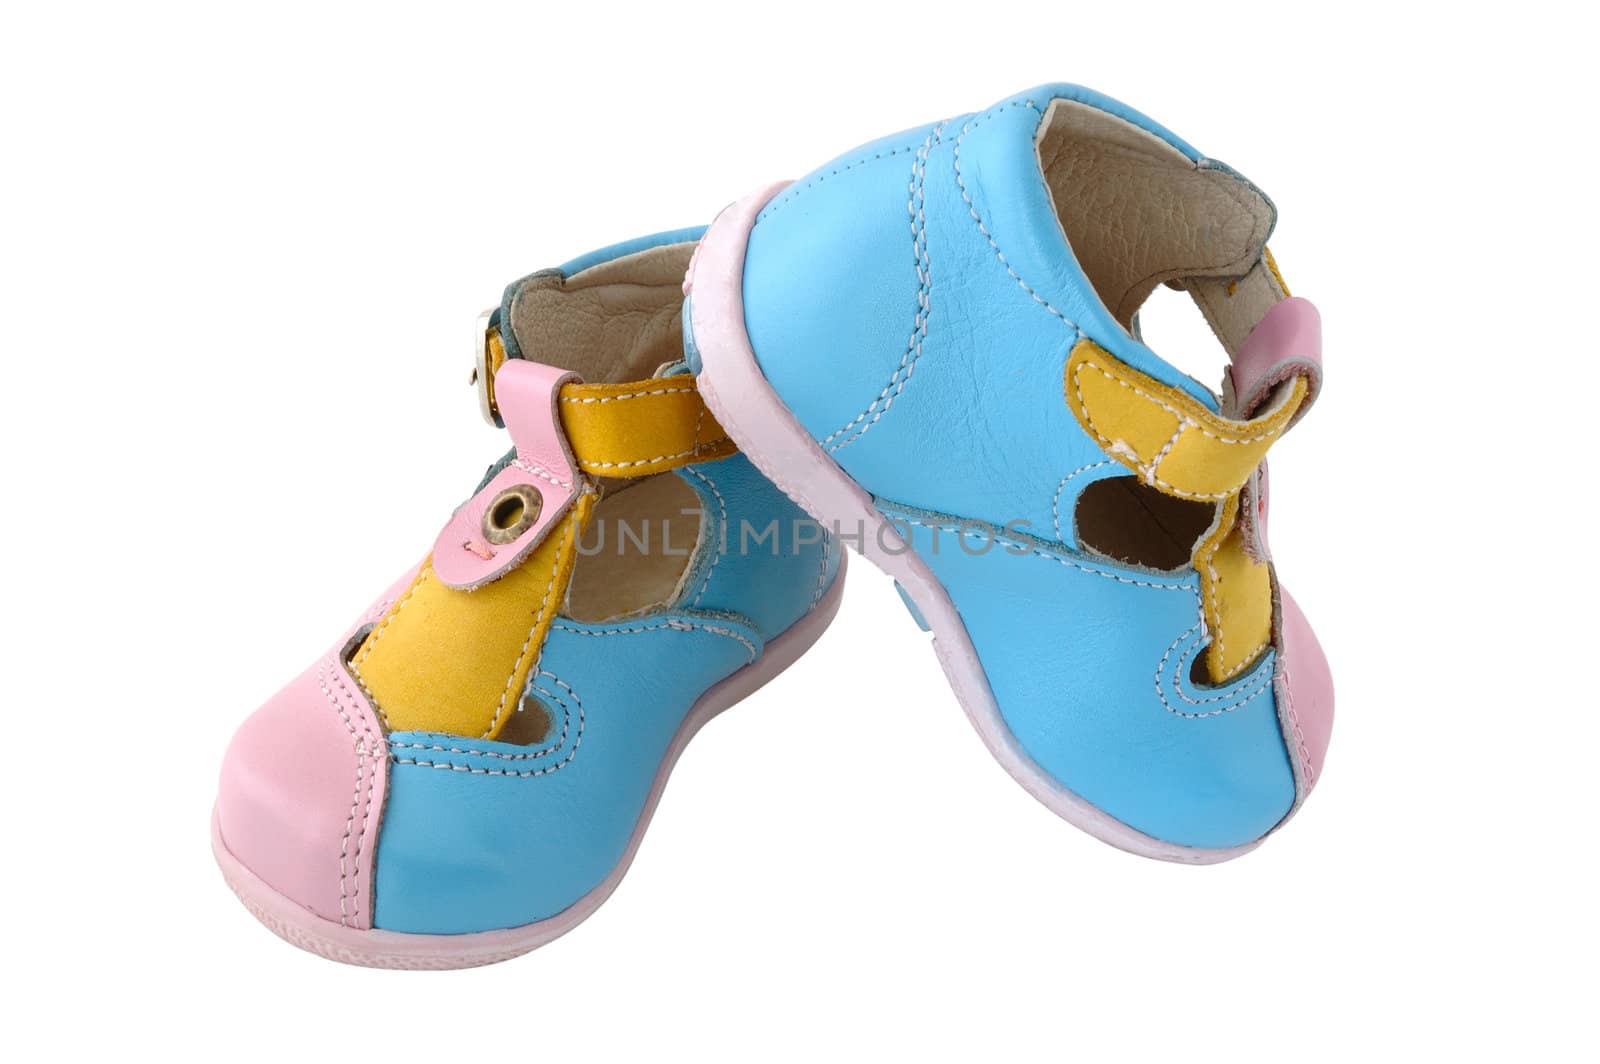 Baby's summer leather boots. Coloured in bright colours - pink, blue and yellow.